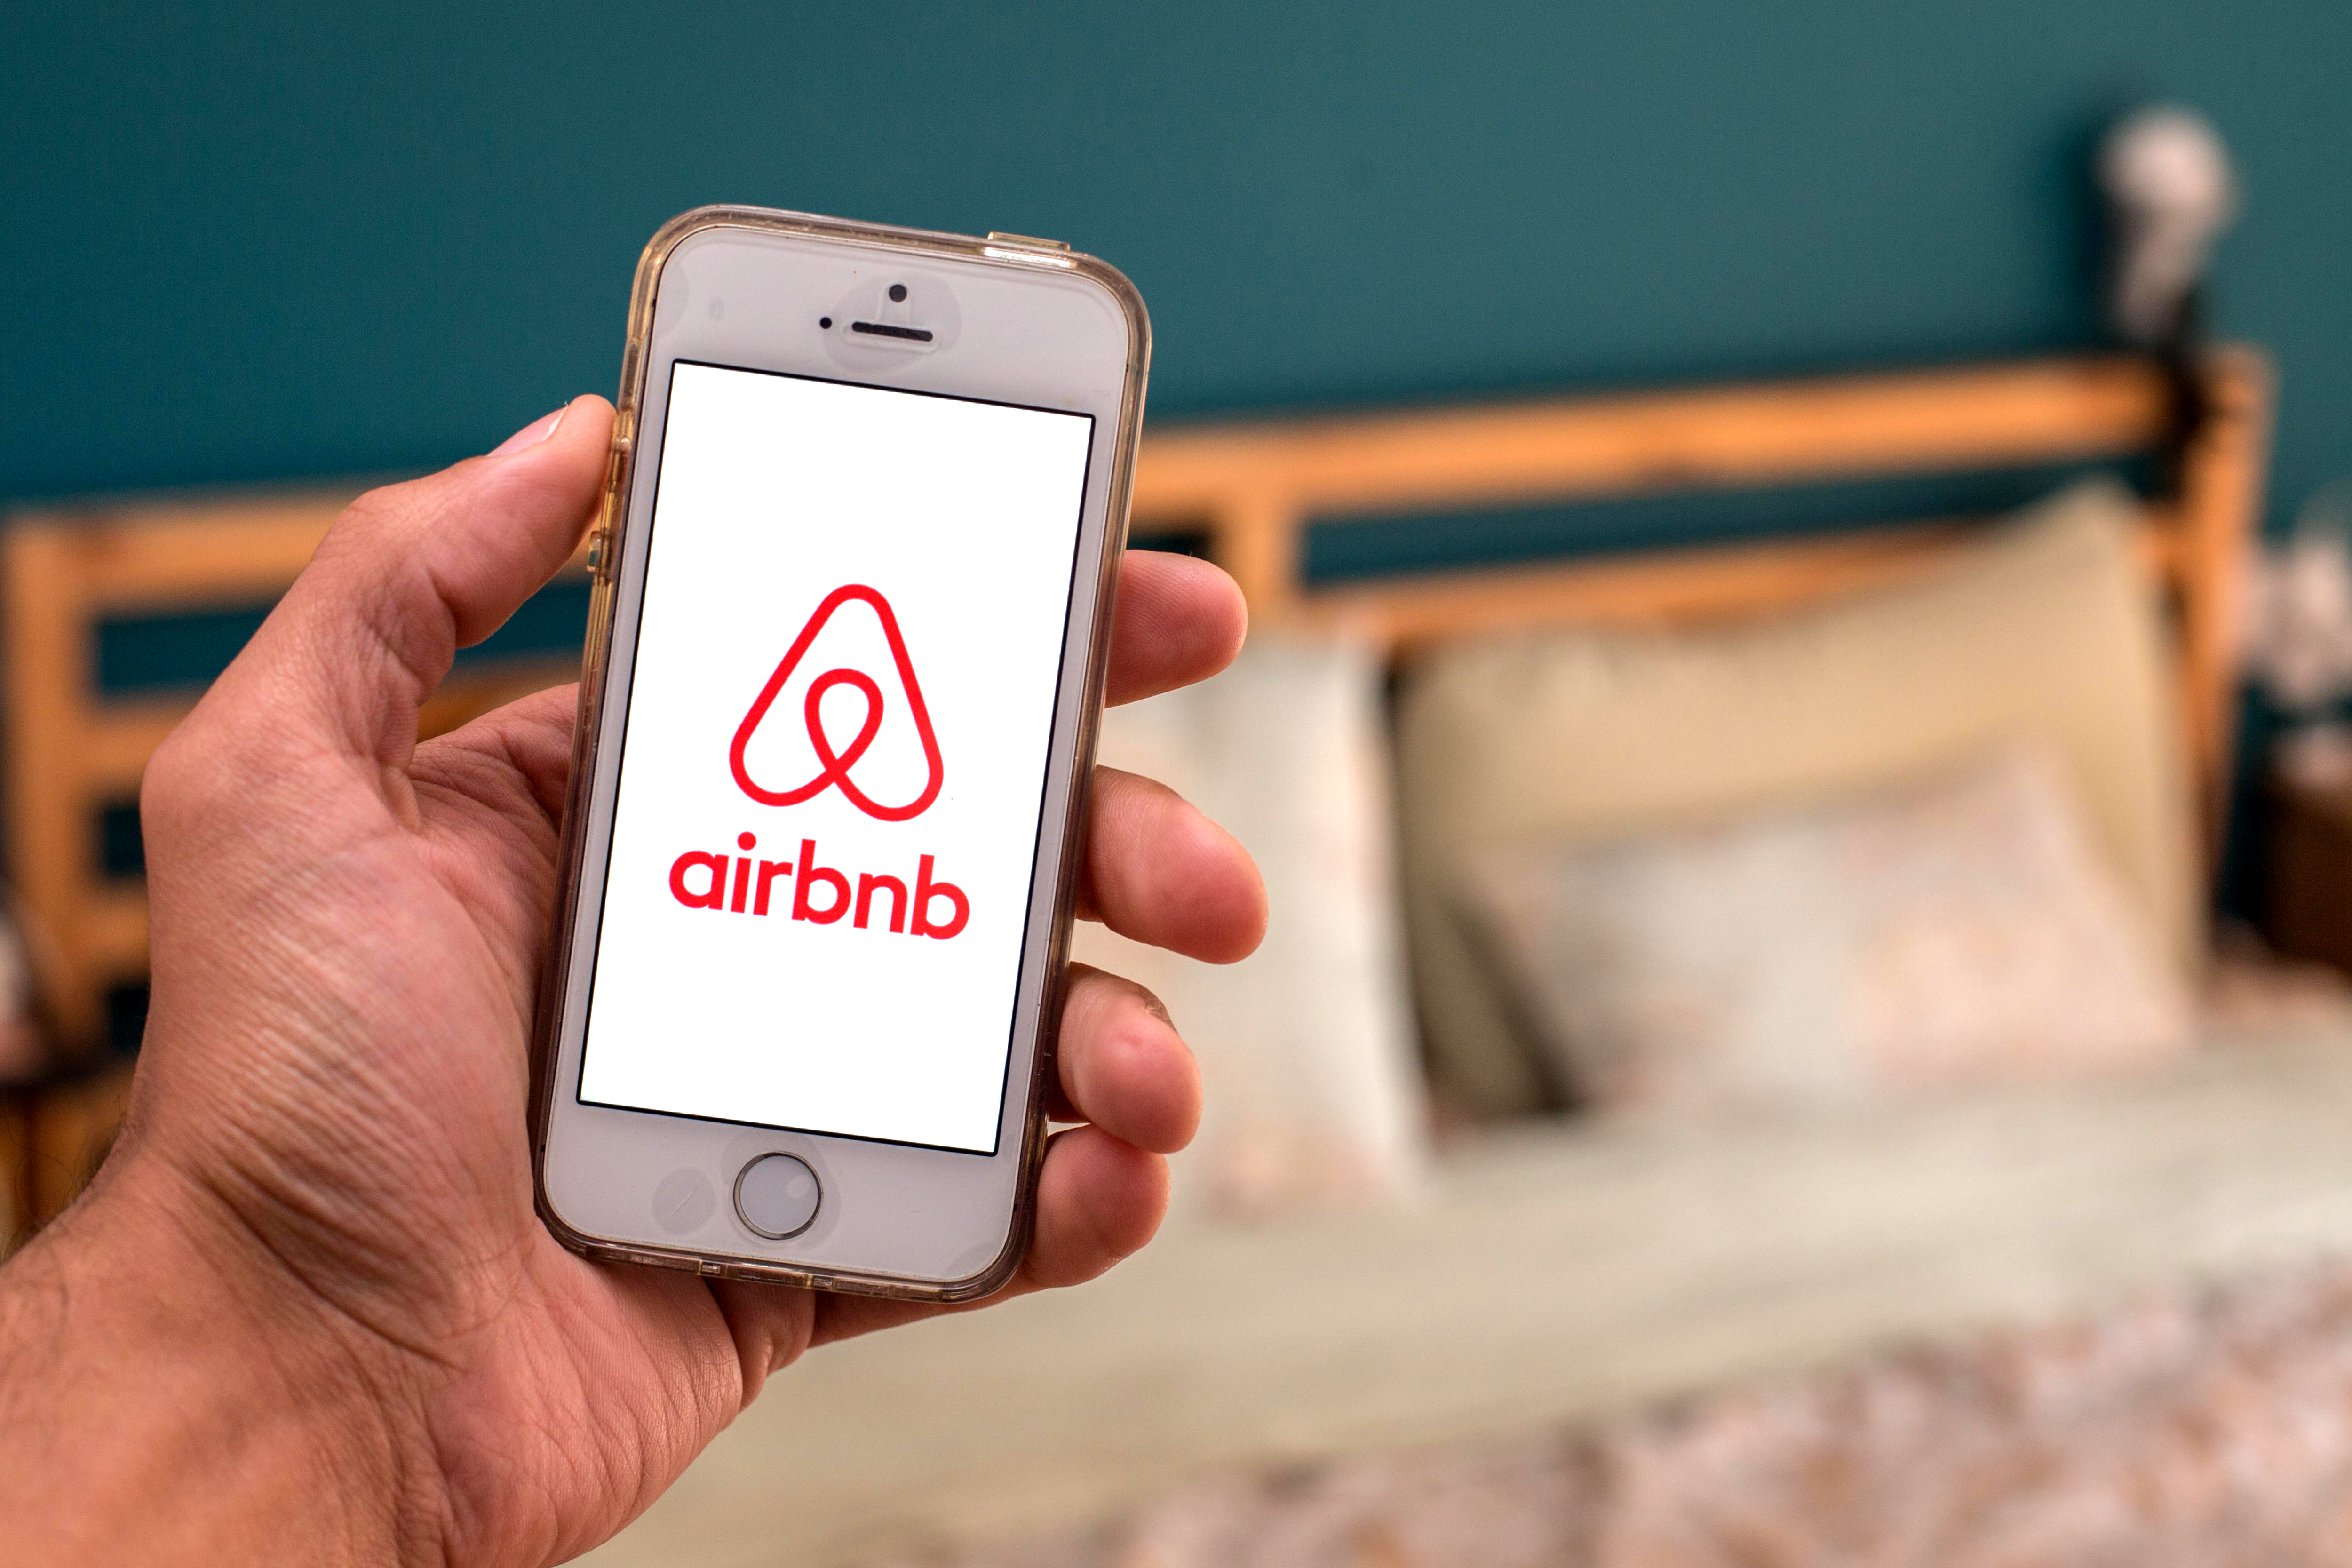 Airbnb to shut down all China listings from July 30